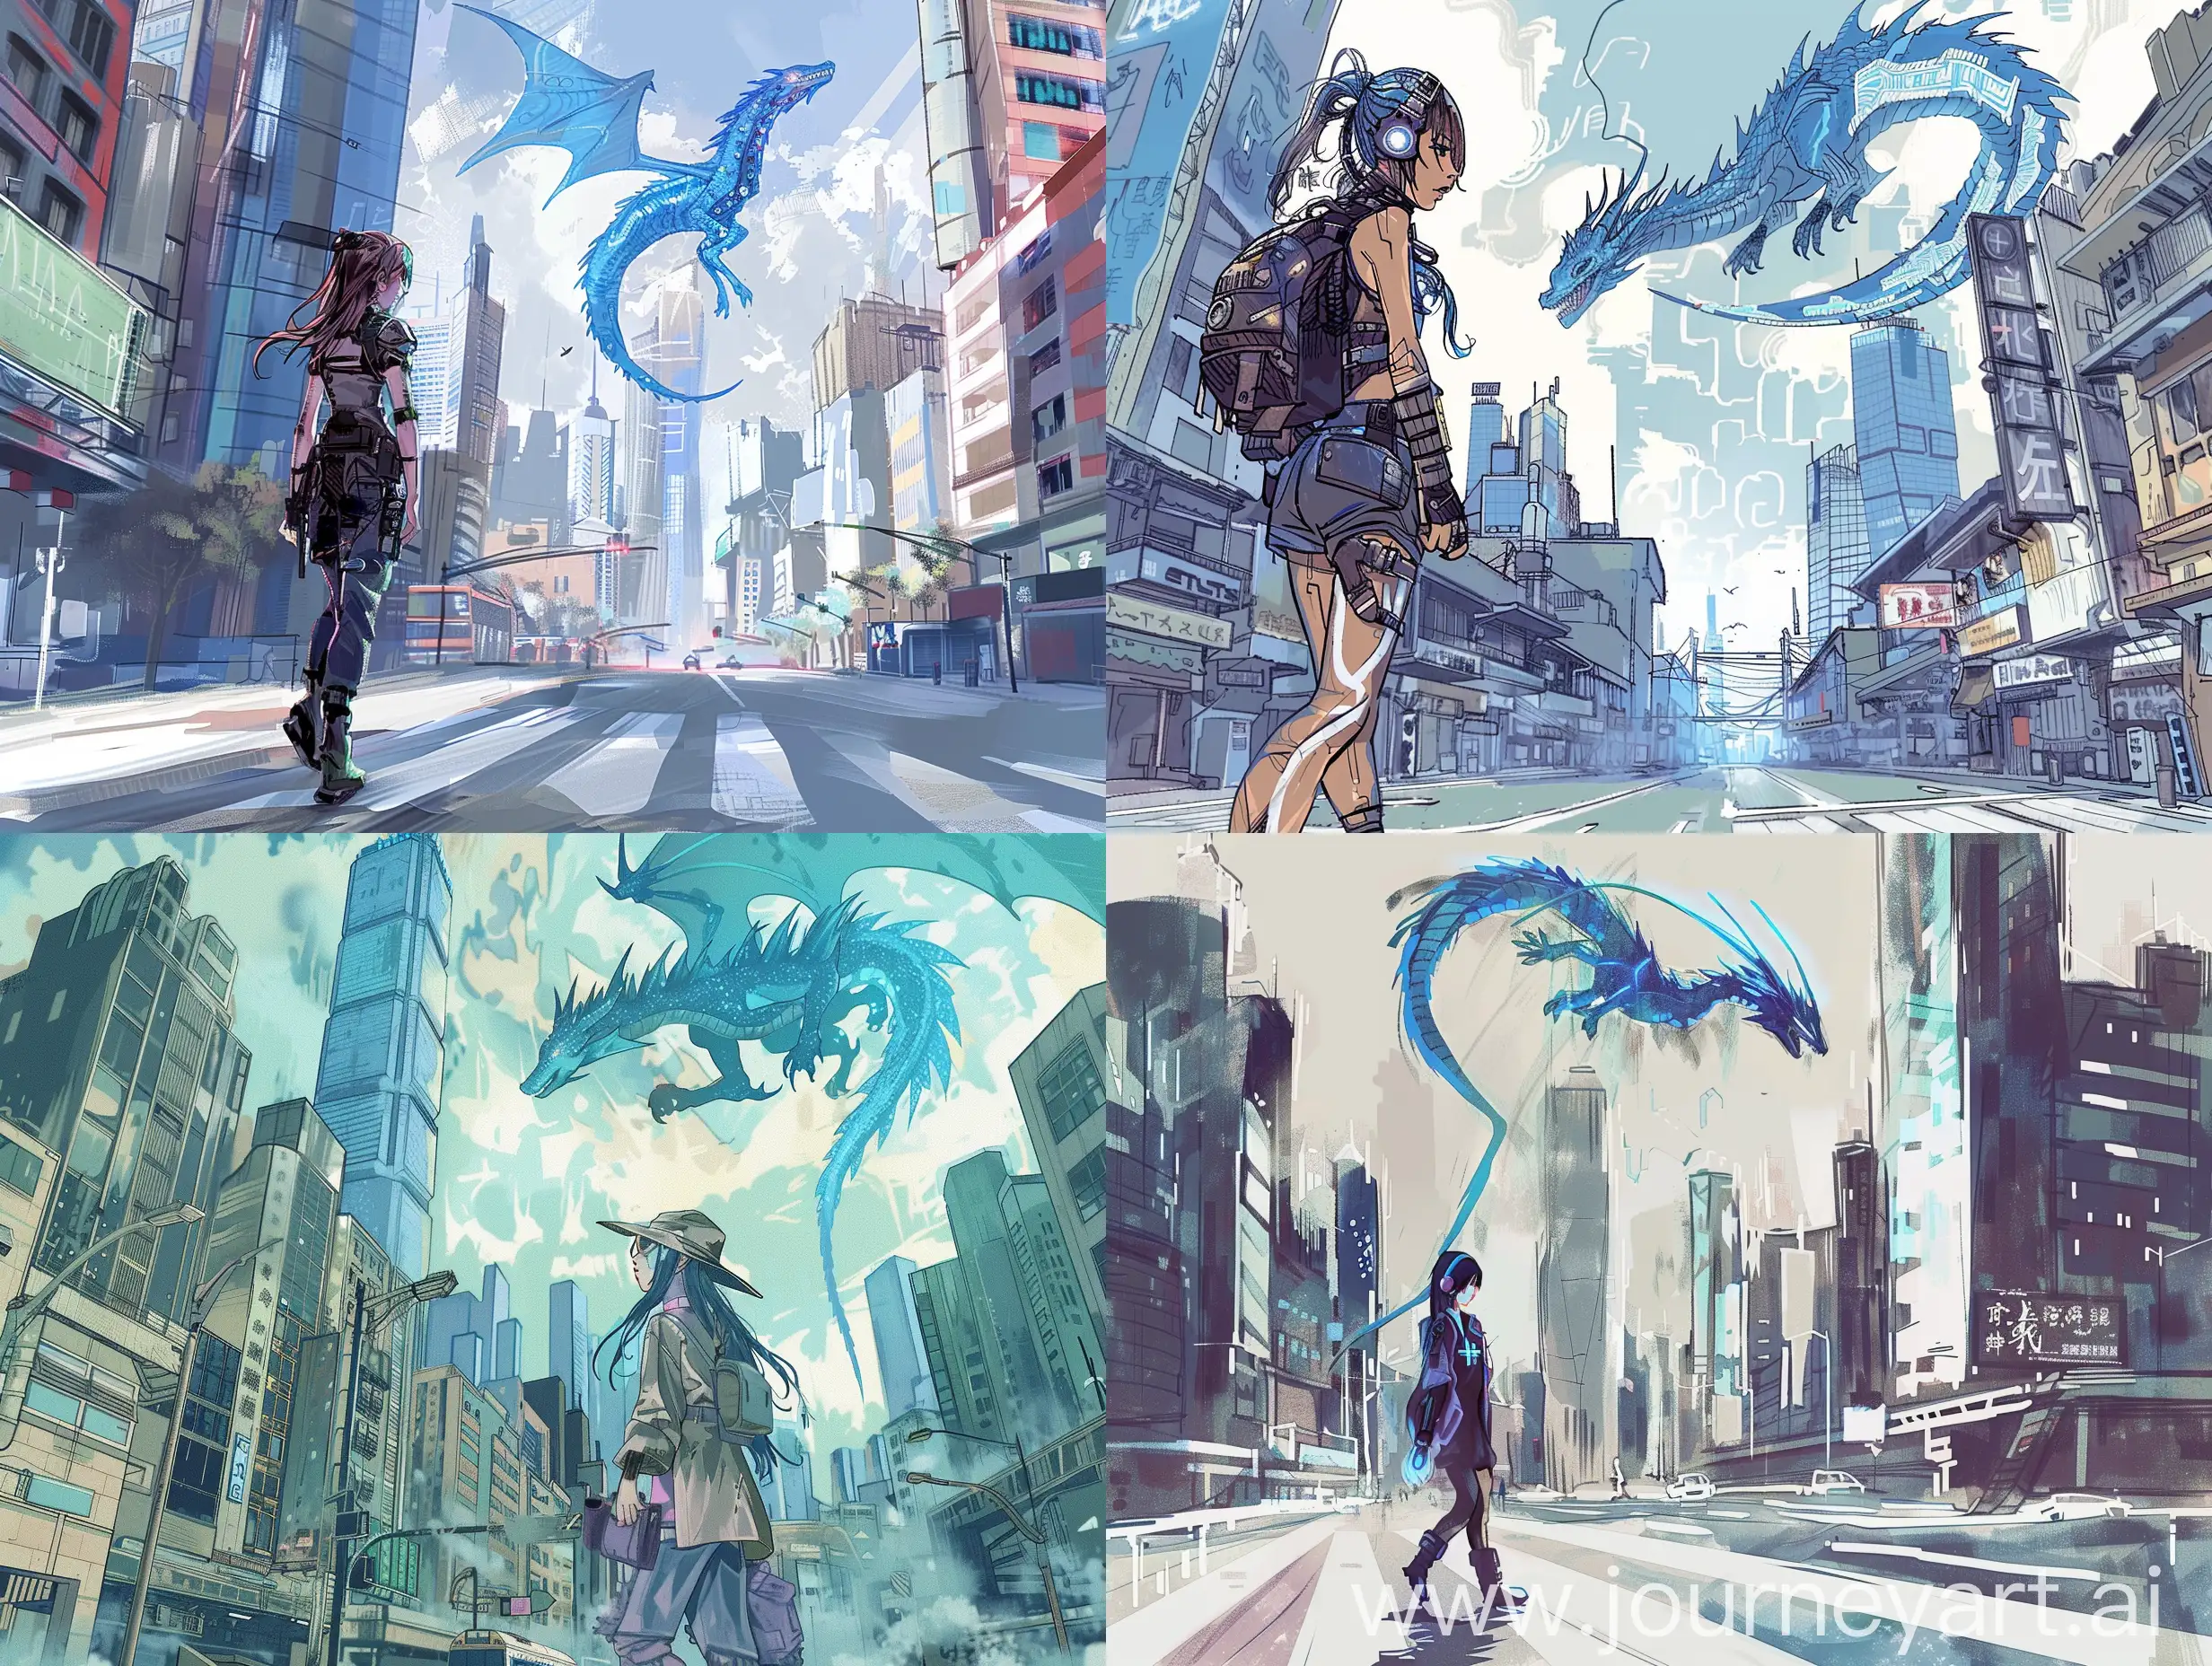 Cyberpunk-Girl-Walking-in-City-with-Blue-Dragon-Over-Skyscrapers